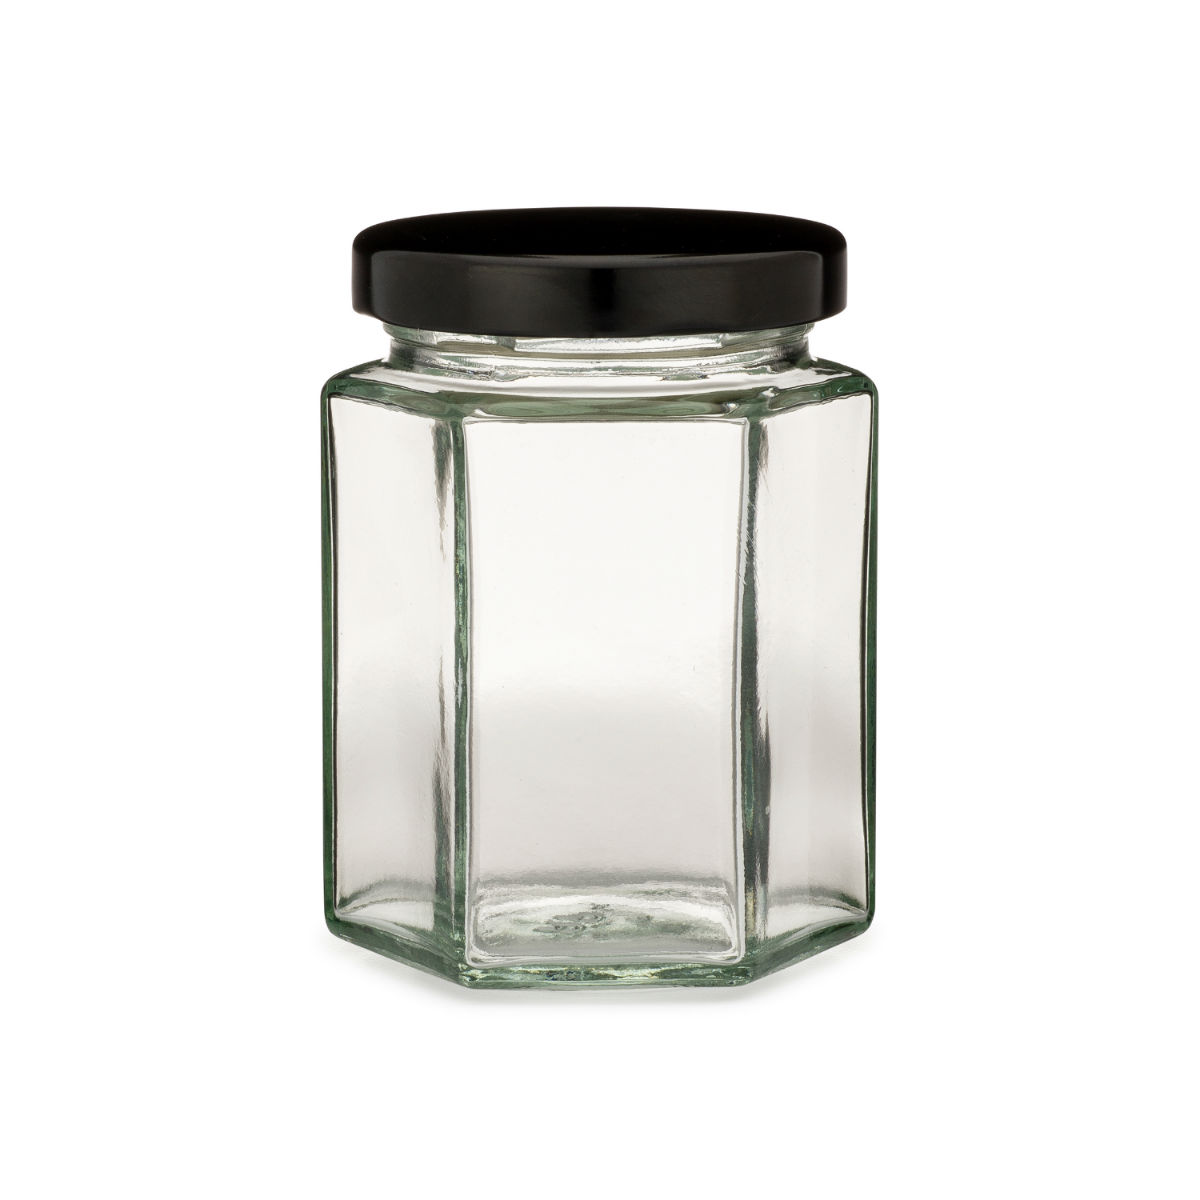 26-PACK Mini Hexagon Glass Jars with 2 Types of Labels: Chalk